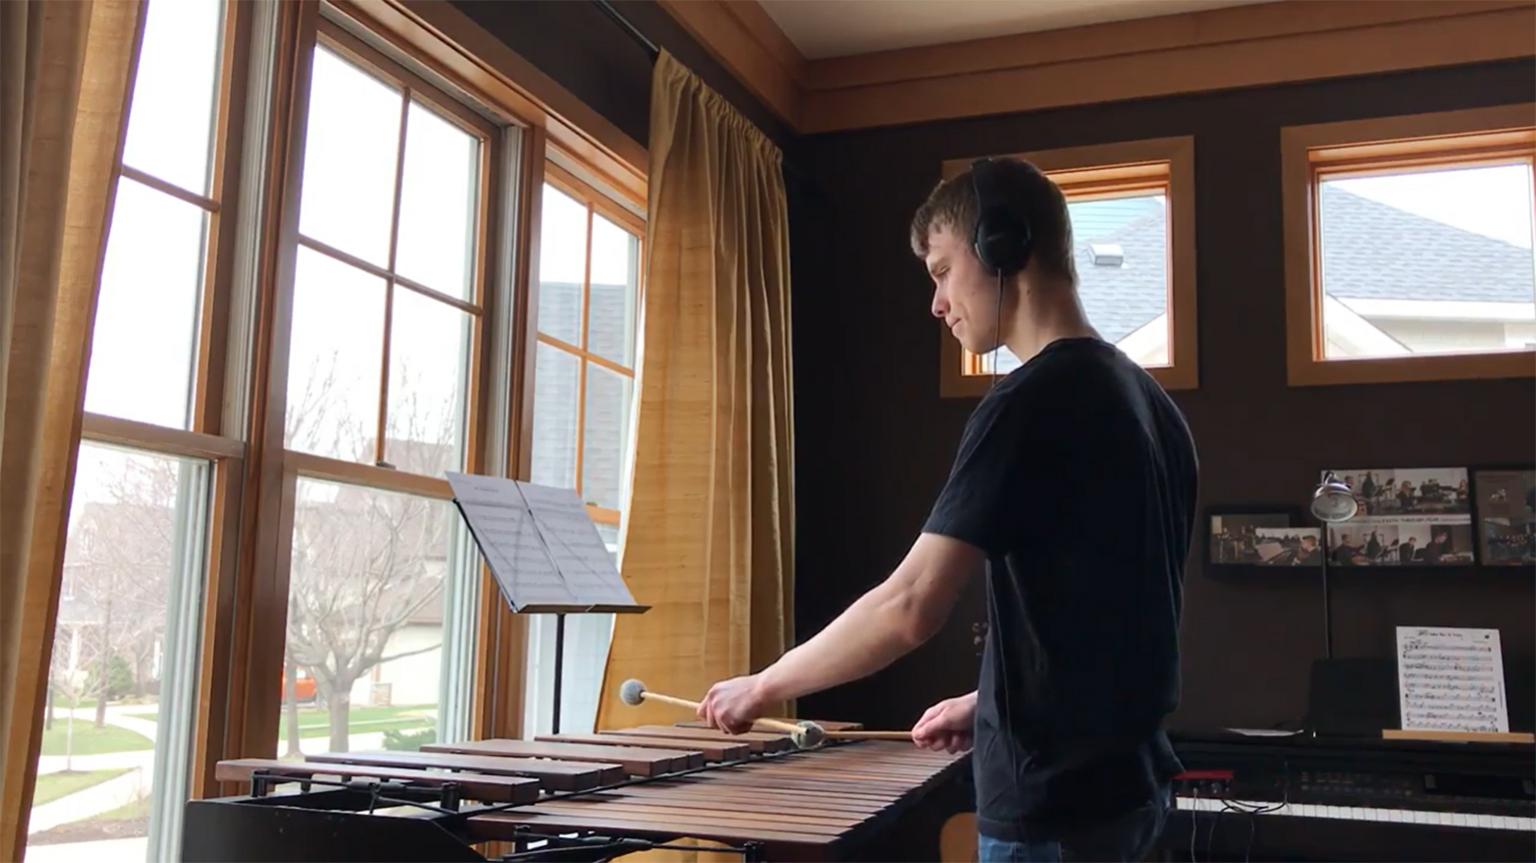 A student playing a set of marimbas in front of a window.